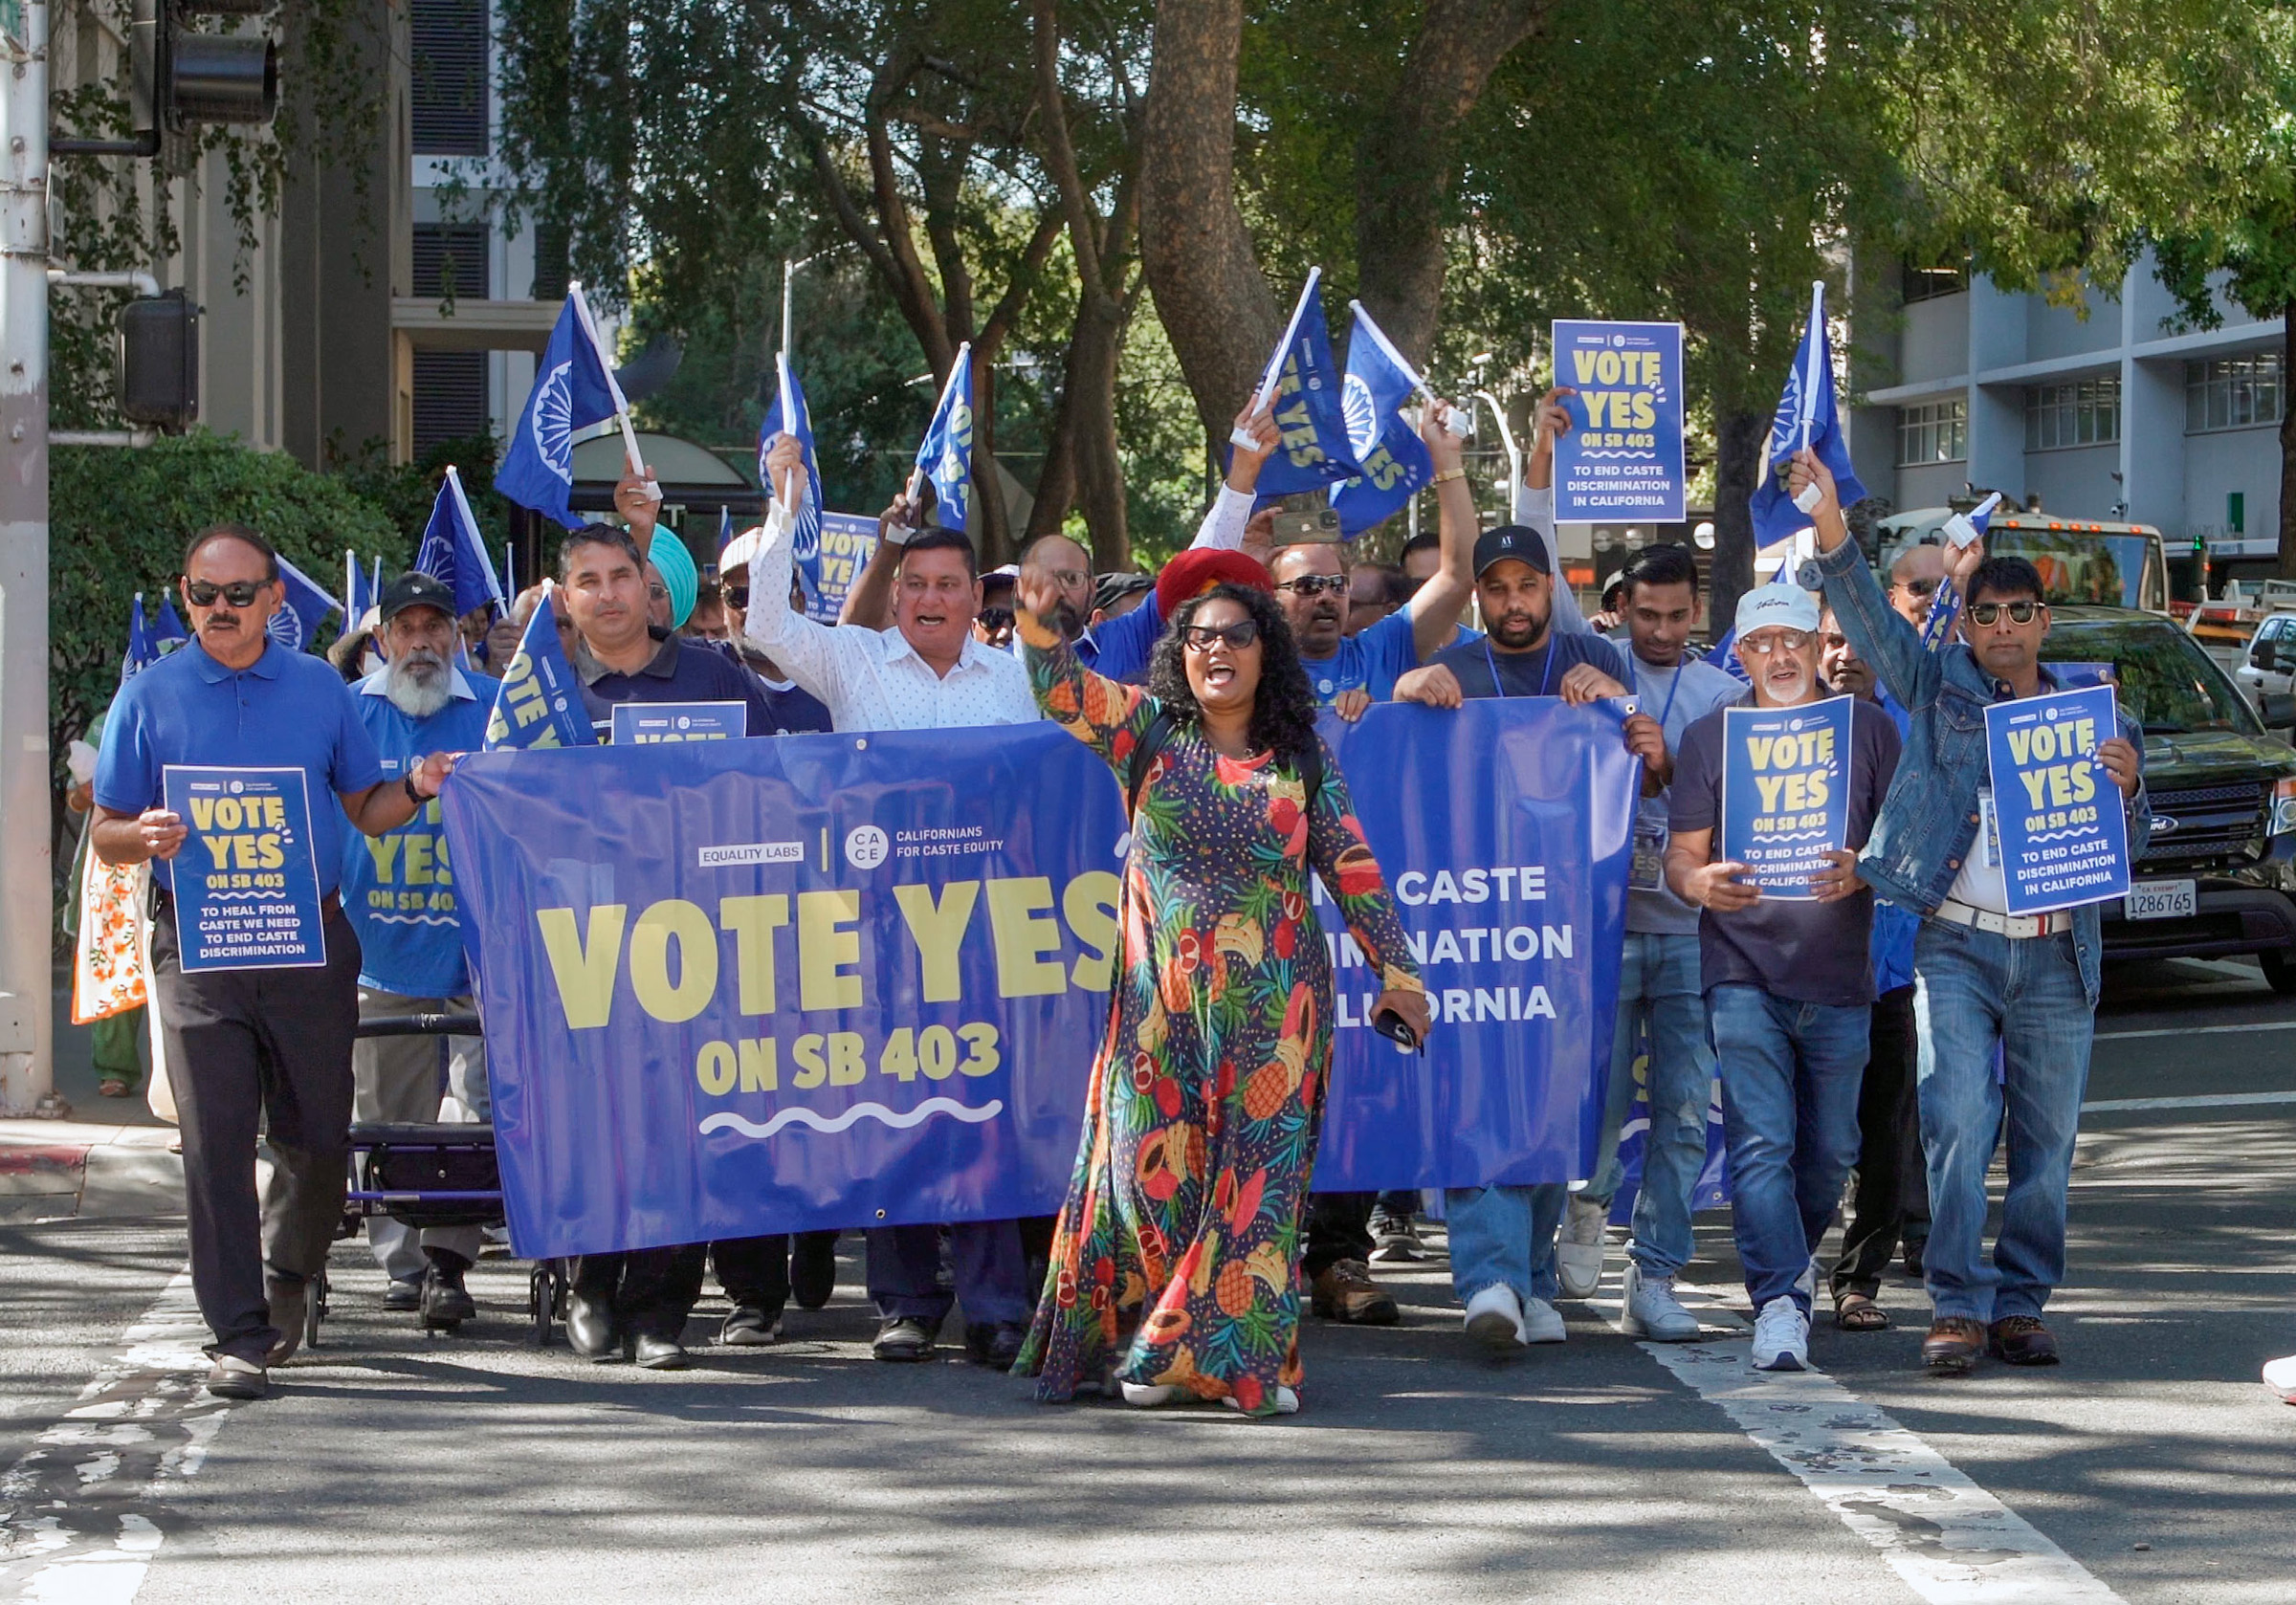 Thenmozhi Soundararajan, center, leads a groups of demonstrators marching in favor of SB 403 in Sacramento, California. Photo courtesy of Equality Labs